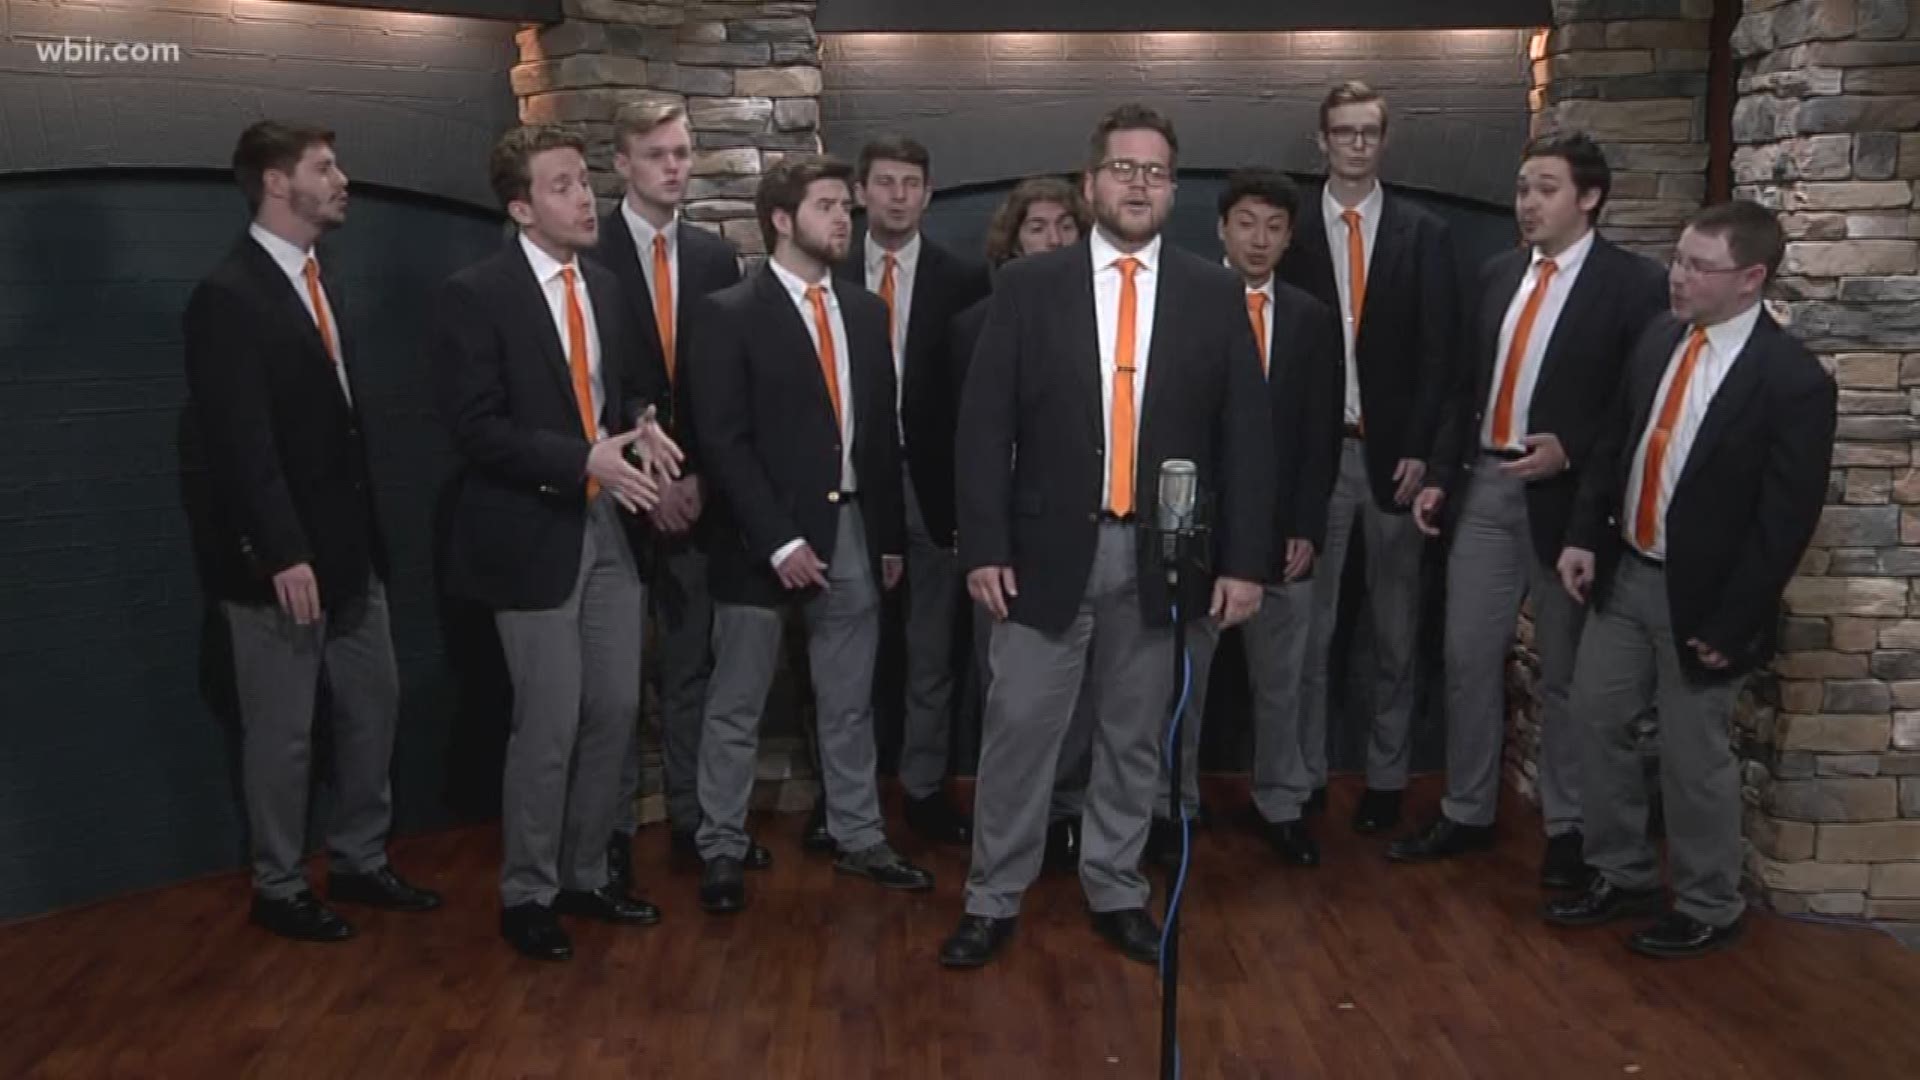 The University of Tennessee VOLume a capella group will perform as part of the Rossini Festival. Learn more about Rossini Festival at knoxvilleopera.com. Follow VOLume on Facebook and social media. April 9, 2019-4pm p